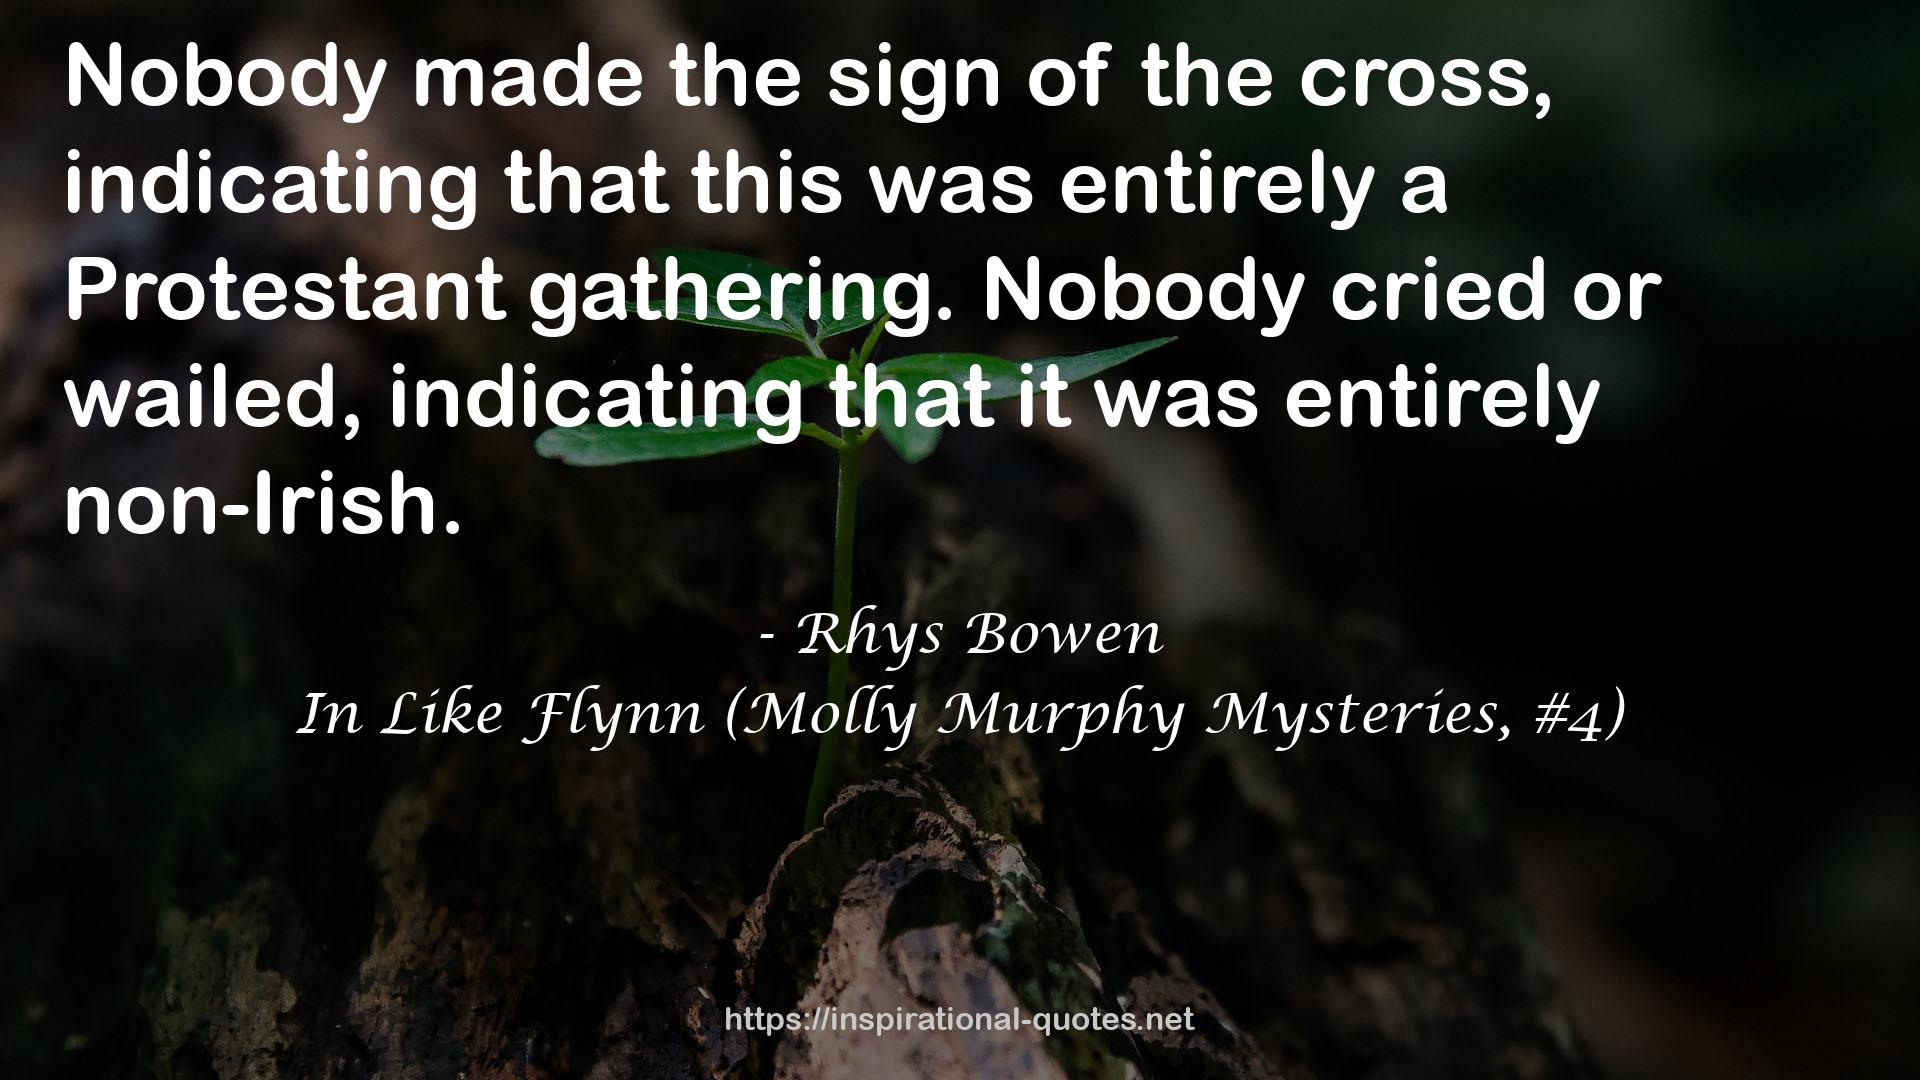 In Like Flynn (Molly Murphy Mysteries, #4) QUOTES